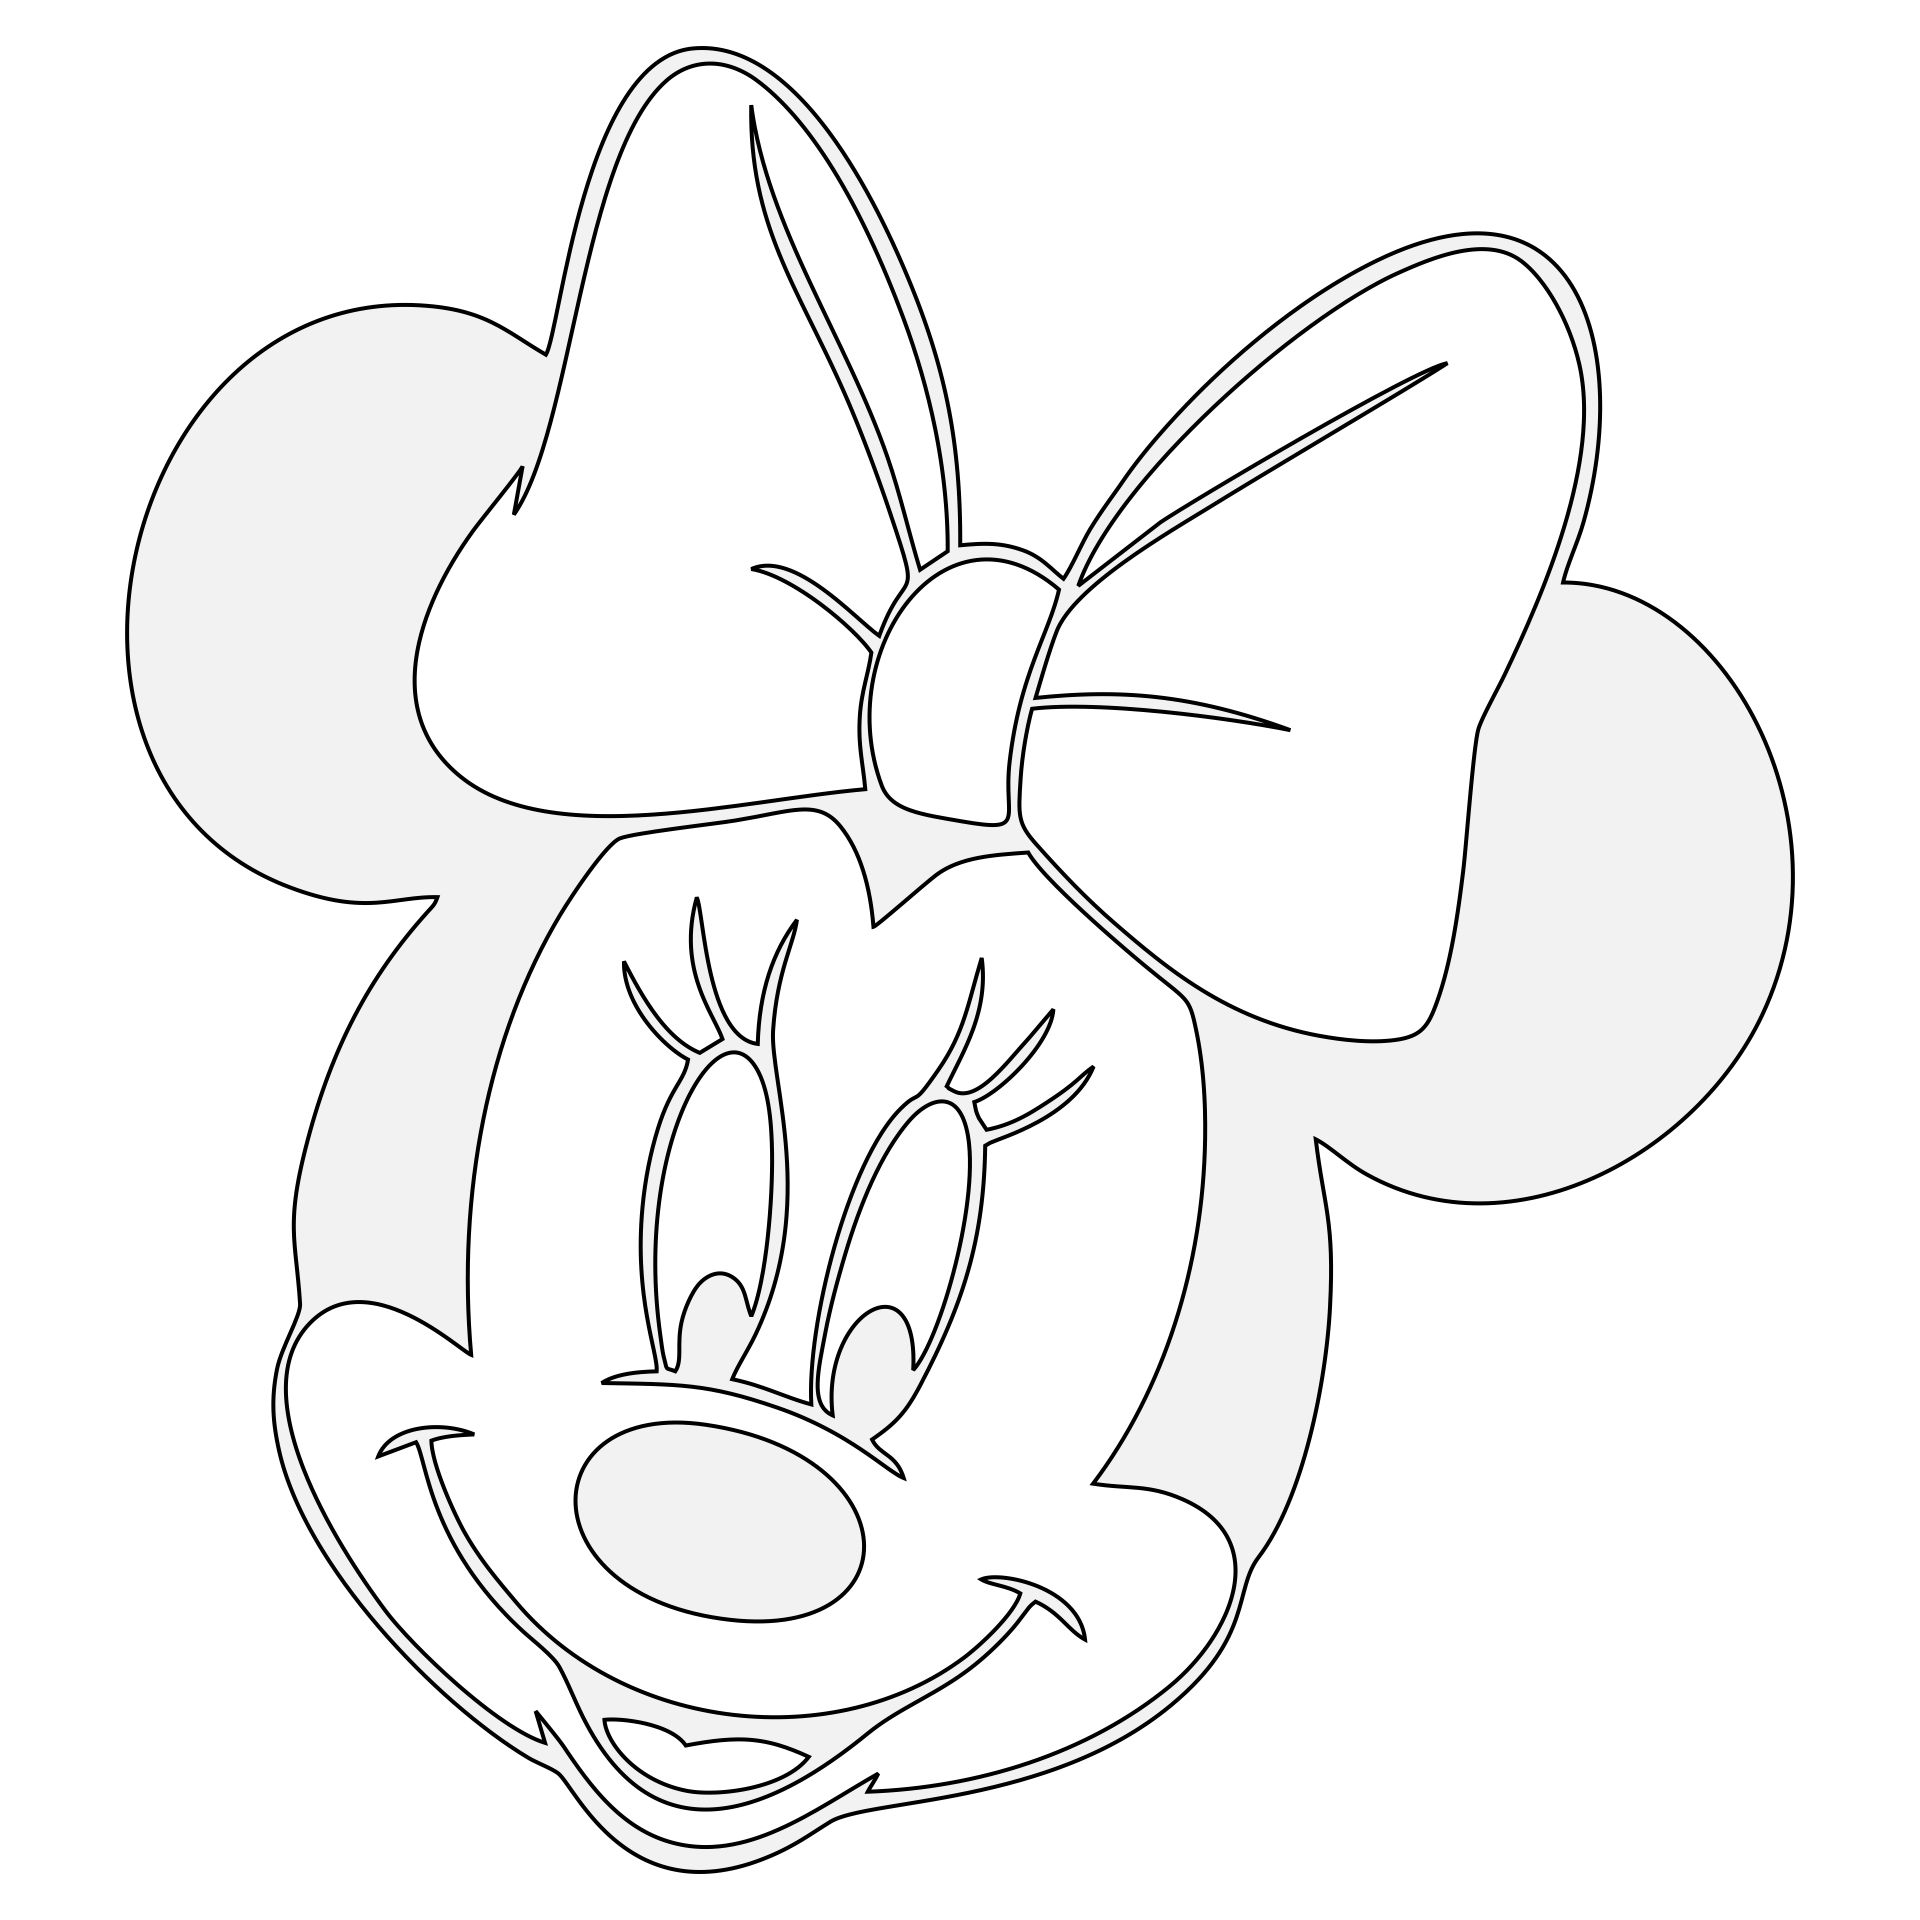 baby minnie mouse cut out template